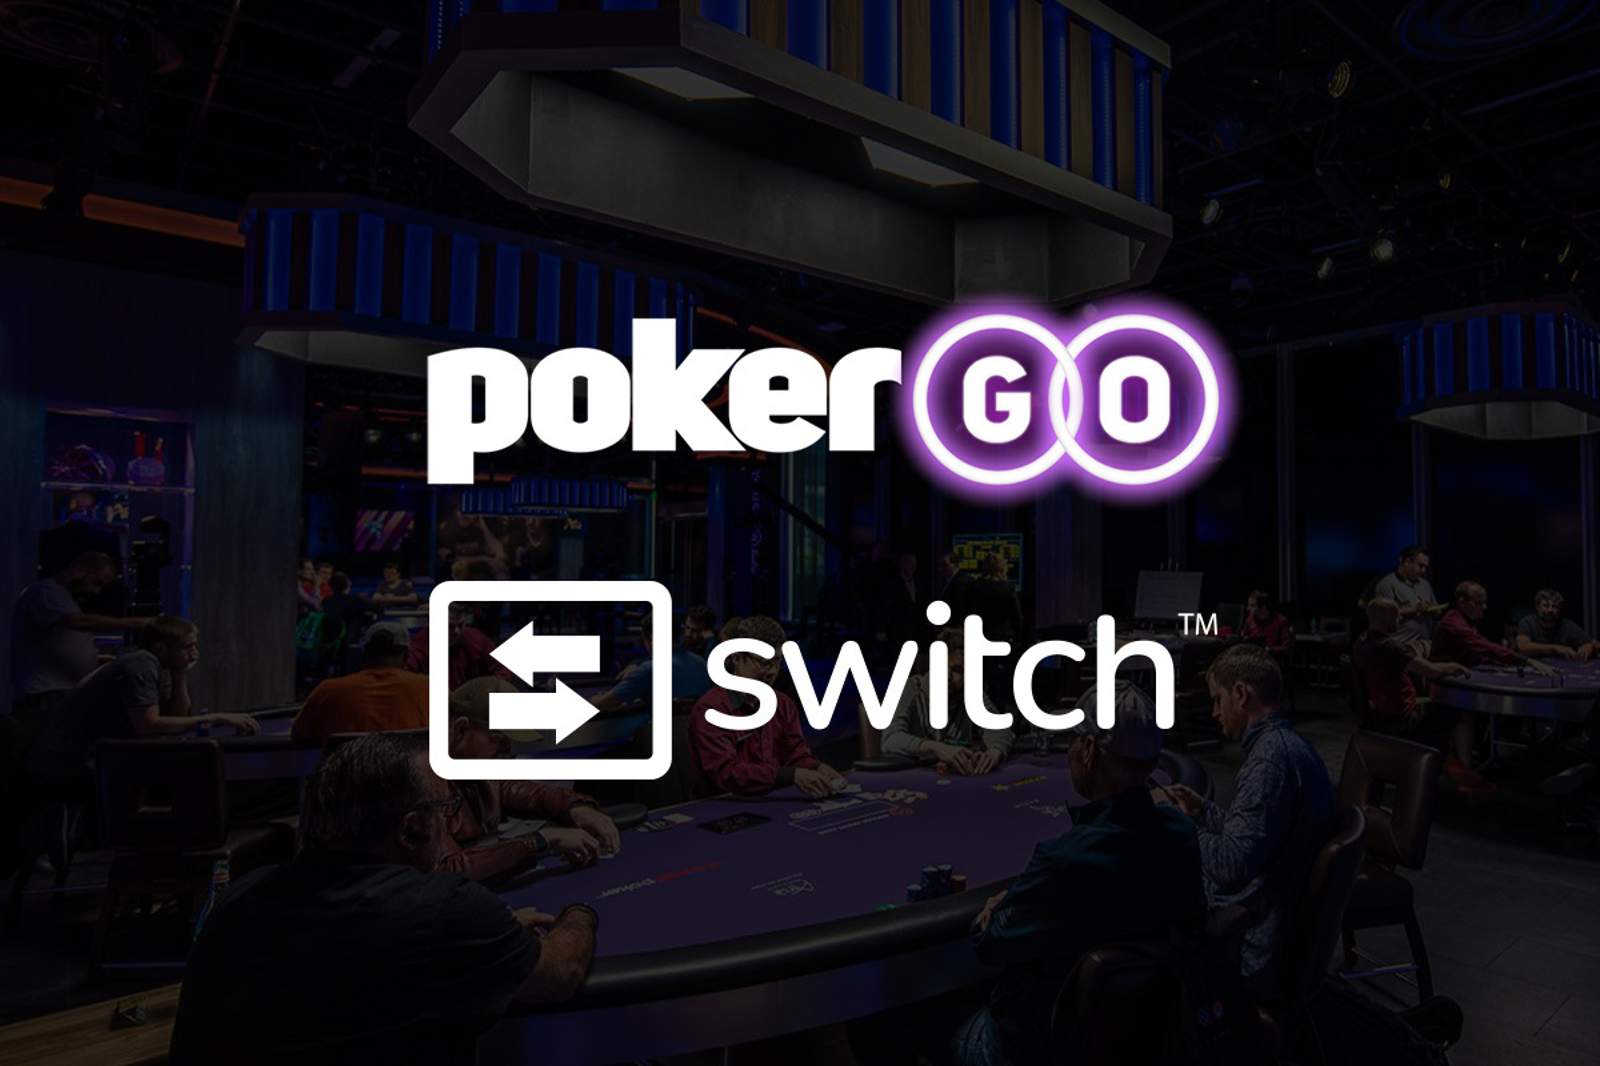 PokerGO® Partners with Switch Reward Card™ for Series of Community Engagement Events at the PokerGO Studio in Las Vegas